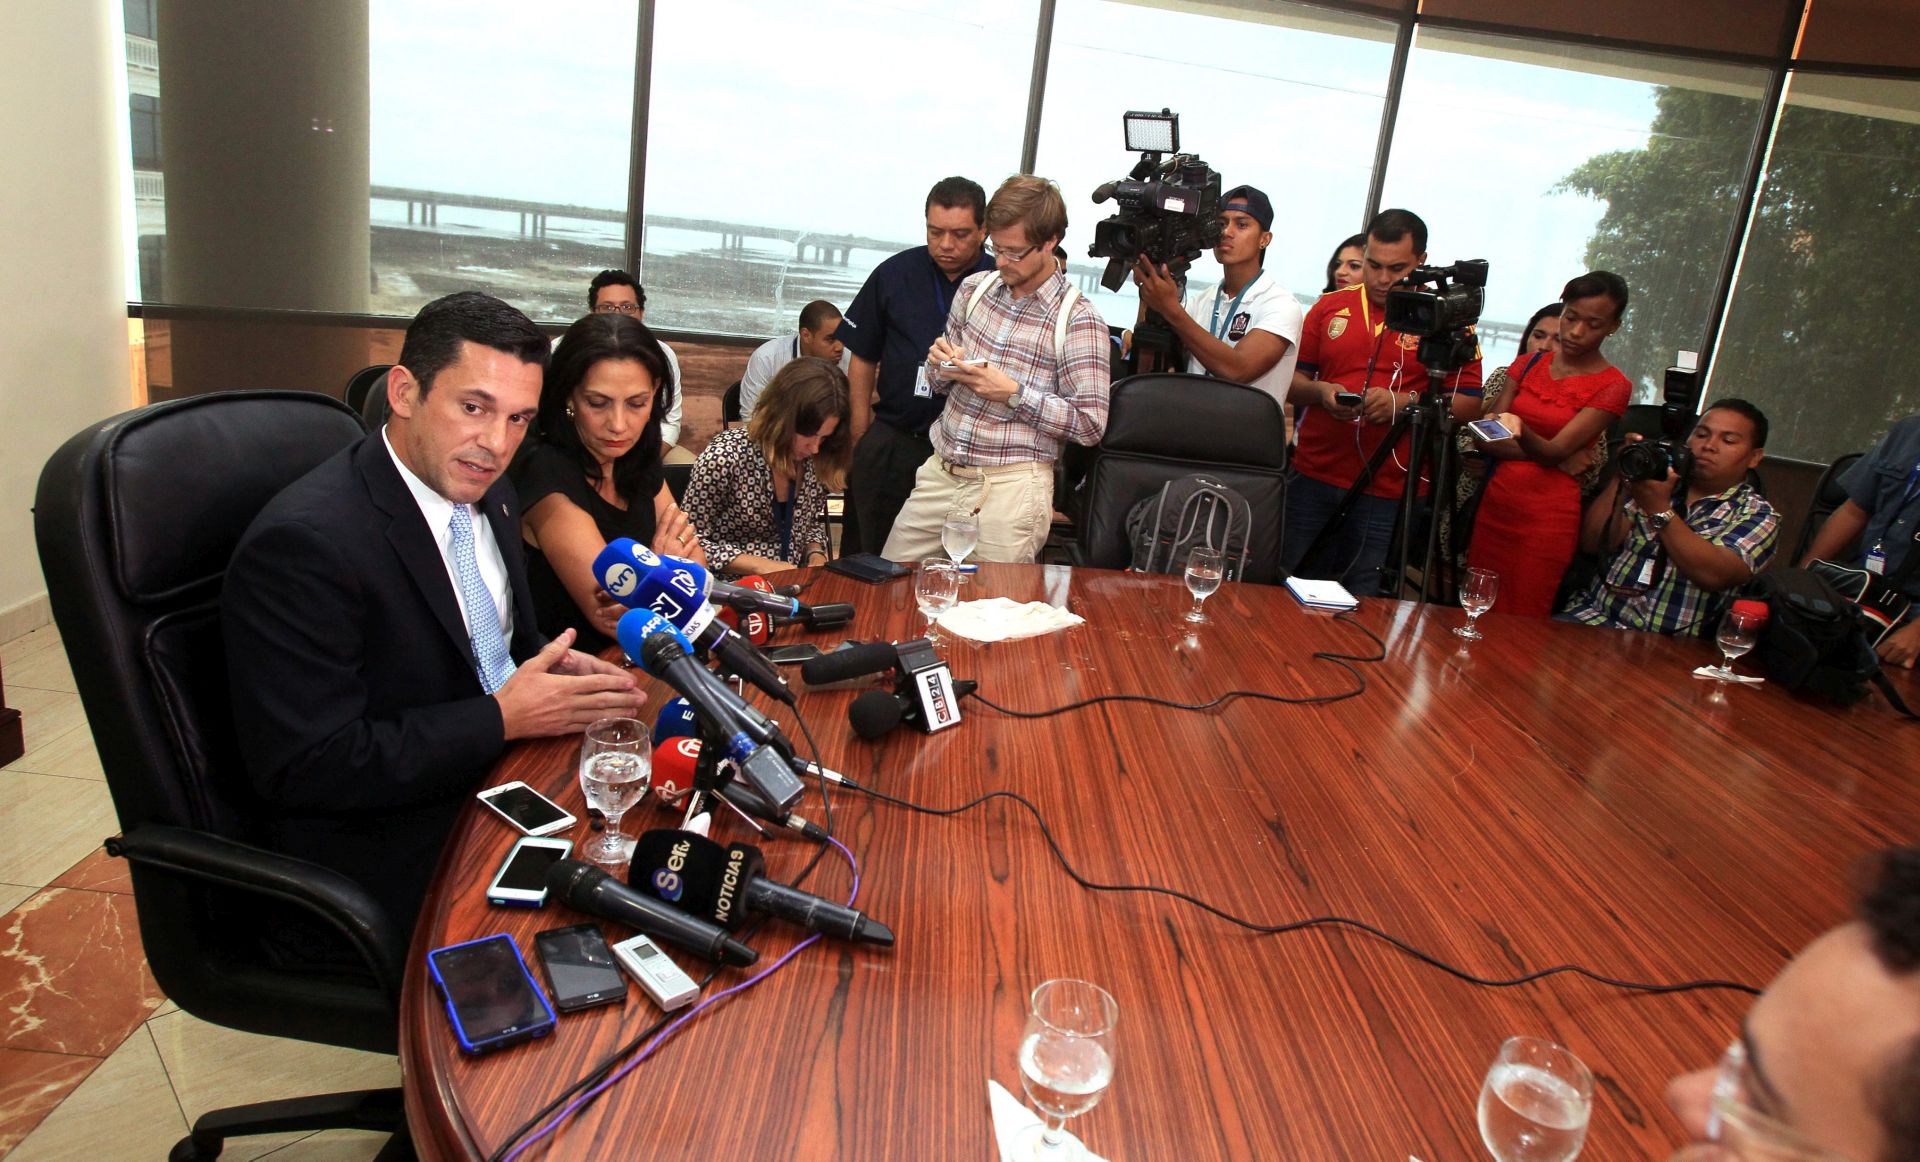 epa05246867 Panamenian Deputy Foreign Minister, Luis Miguel Hincapie (L), talks during a press conference after a meeting with world ambassadors in Panama, Panama City, Panama, 06 April 2016. Leaked documents published on 03 April 2016 suggest that 140 politicians and officials from around the globe, including 72 former and current world leaders, have connections with secret 'offshore' companies to escape tax scrutiny in their countries. The leak involves 11.5 million documents from one of the world's largest offshore law firms, Mossack Fonseca, based in Panama.  EPA/Alejandro Bolivar